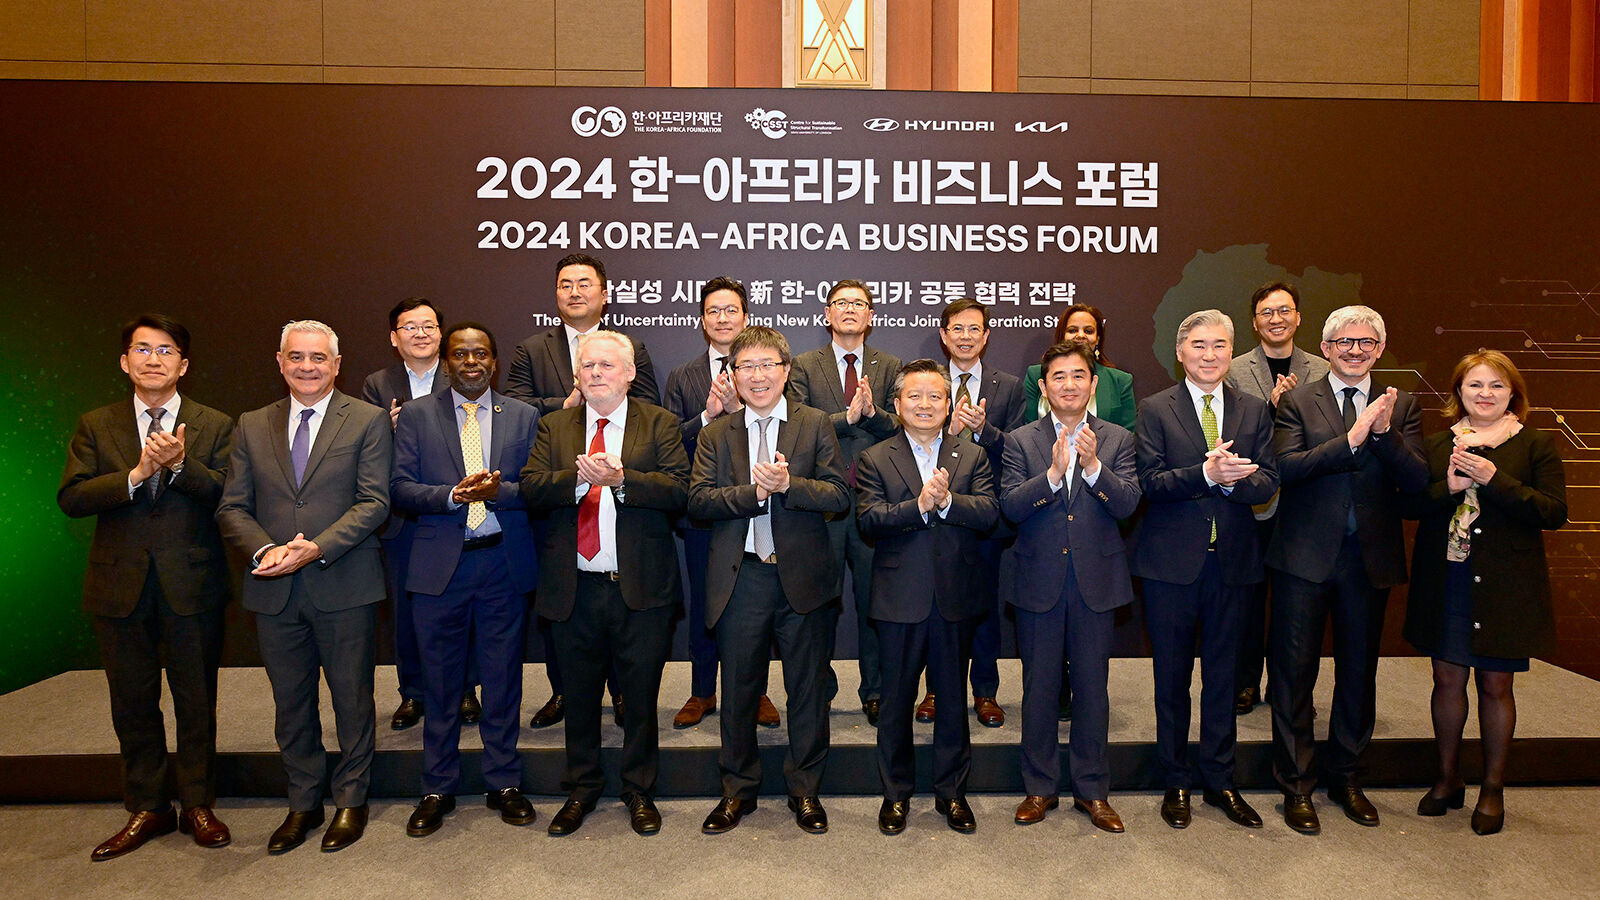 (Image) Hyundai Motor Group Co-Hosts 2024 Korea-Africa Business Forum to Foster Partnerships for Sustainable Development